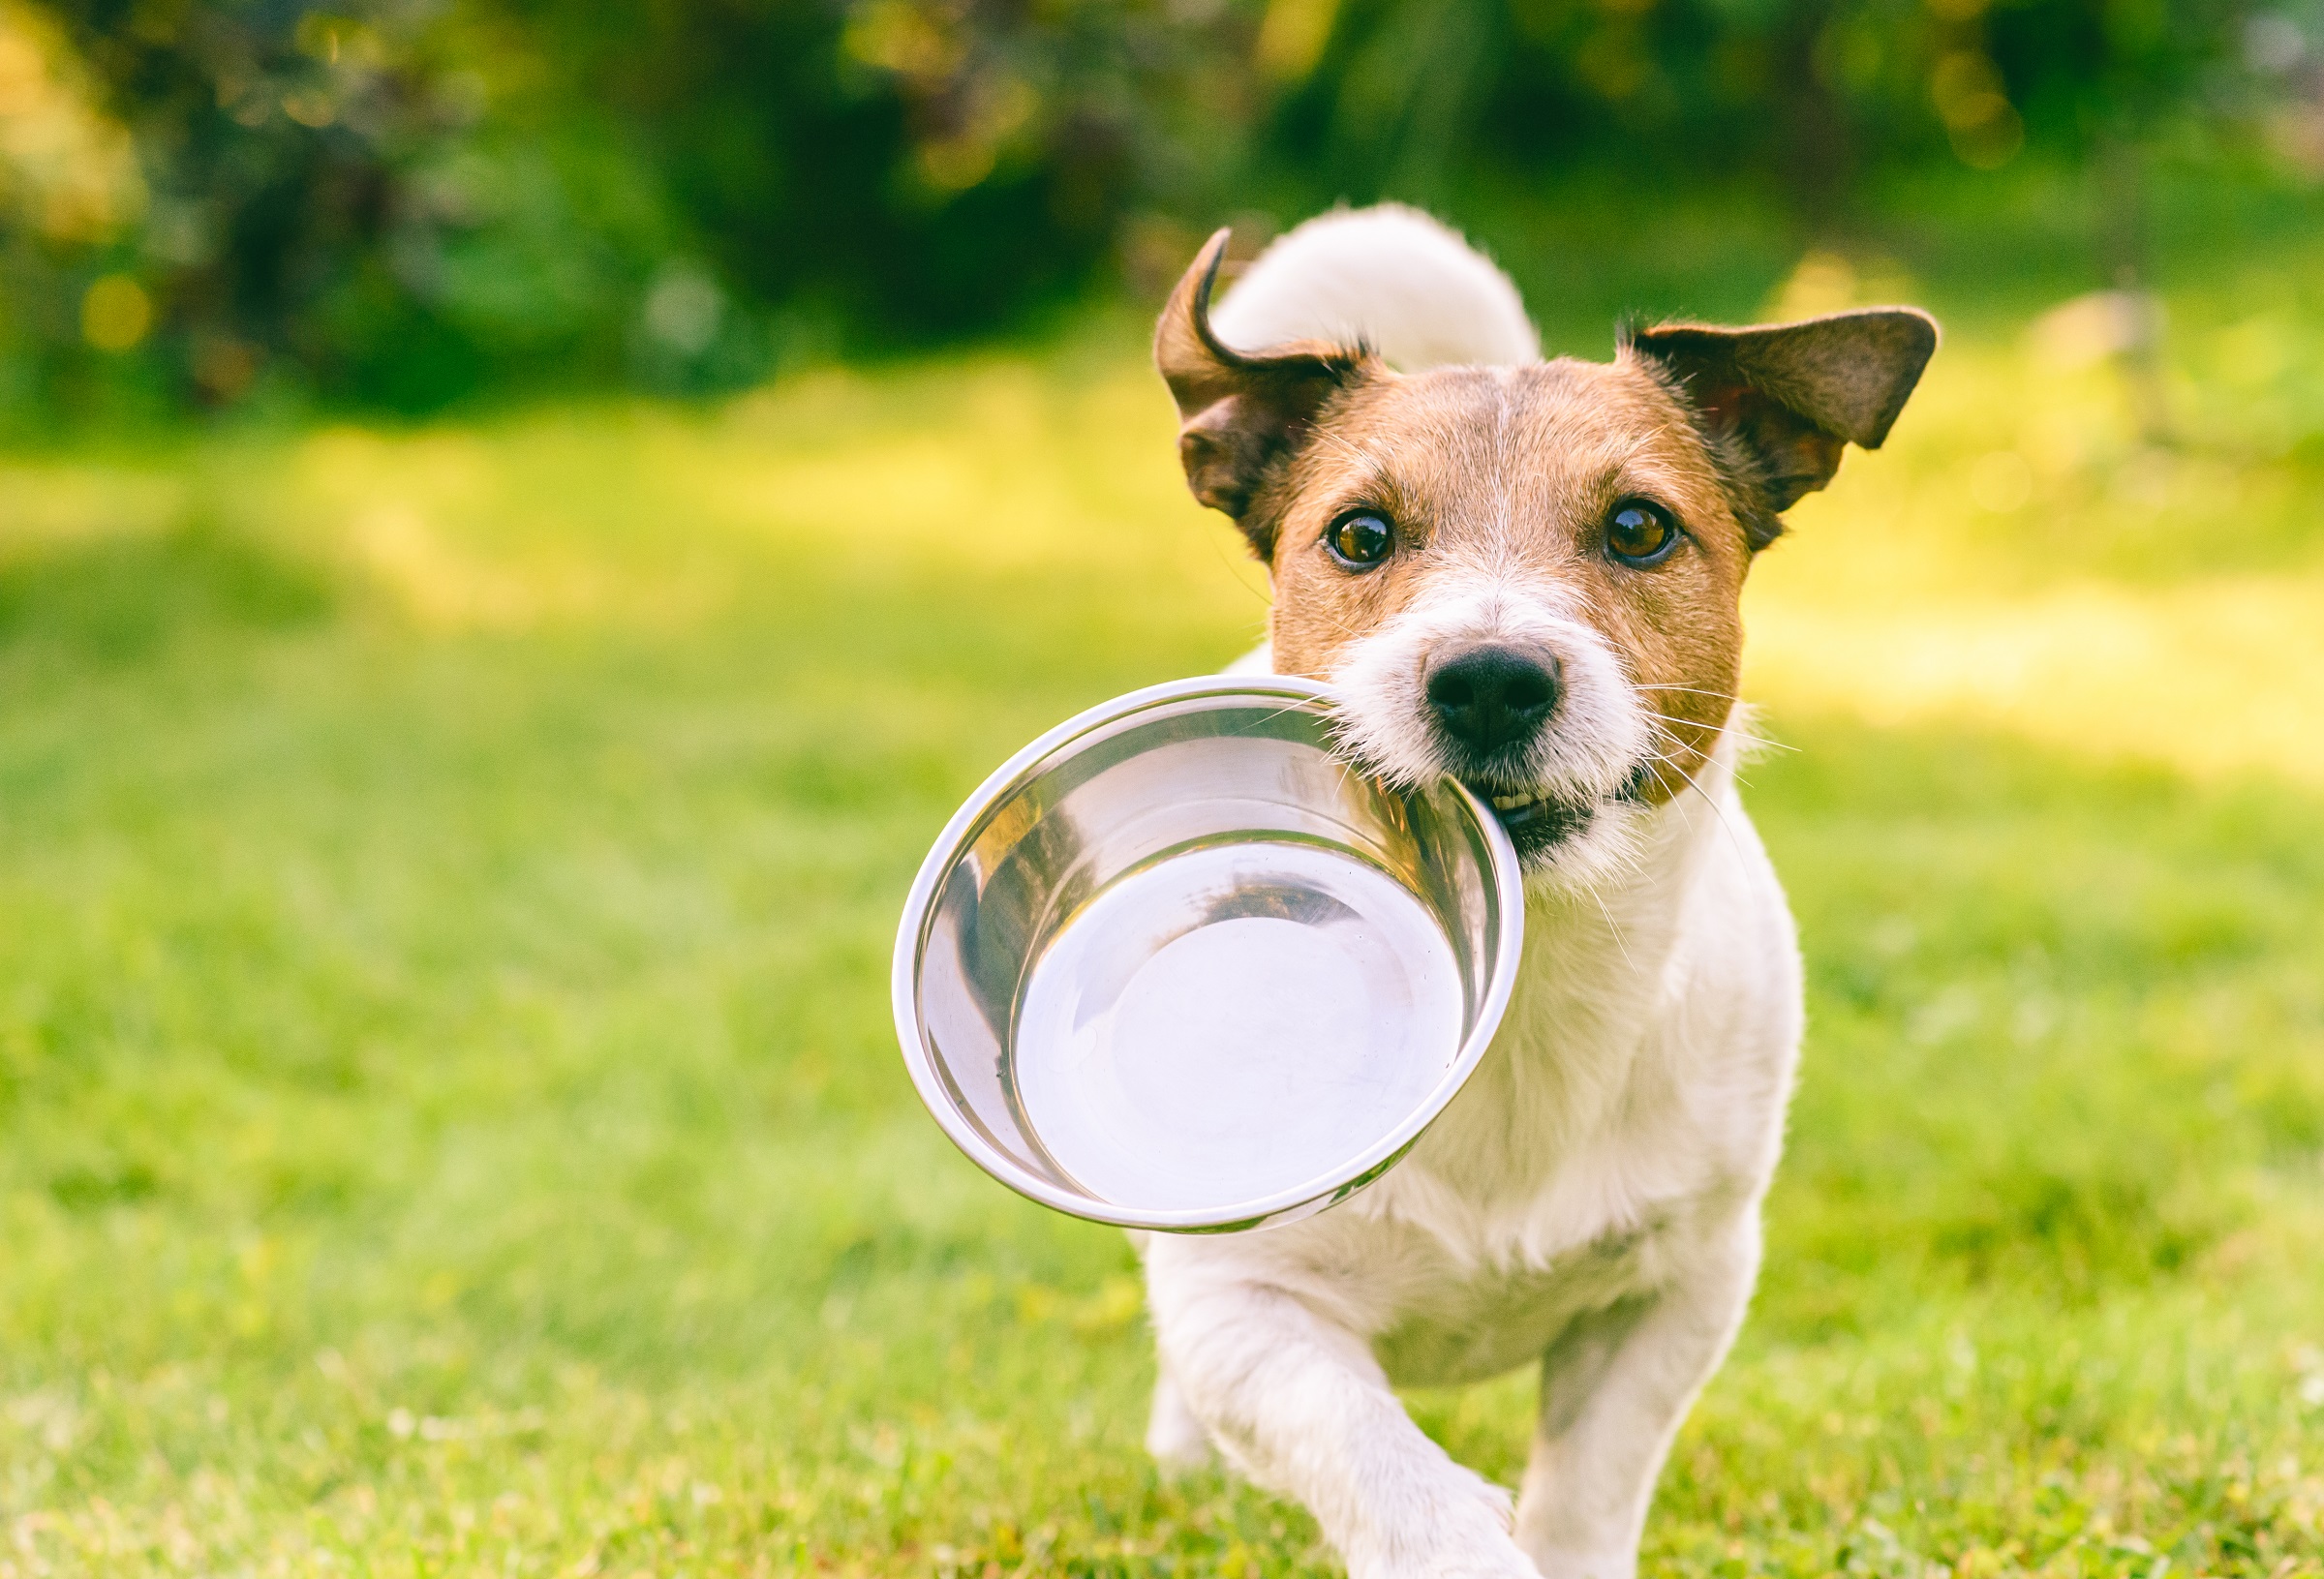 5 key trends shaping pet food industry growth